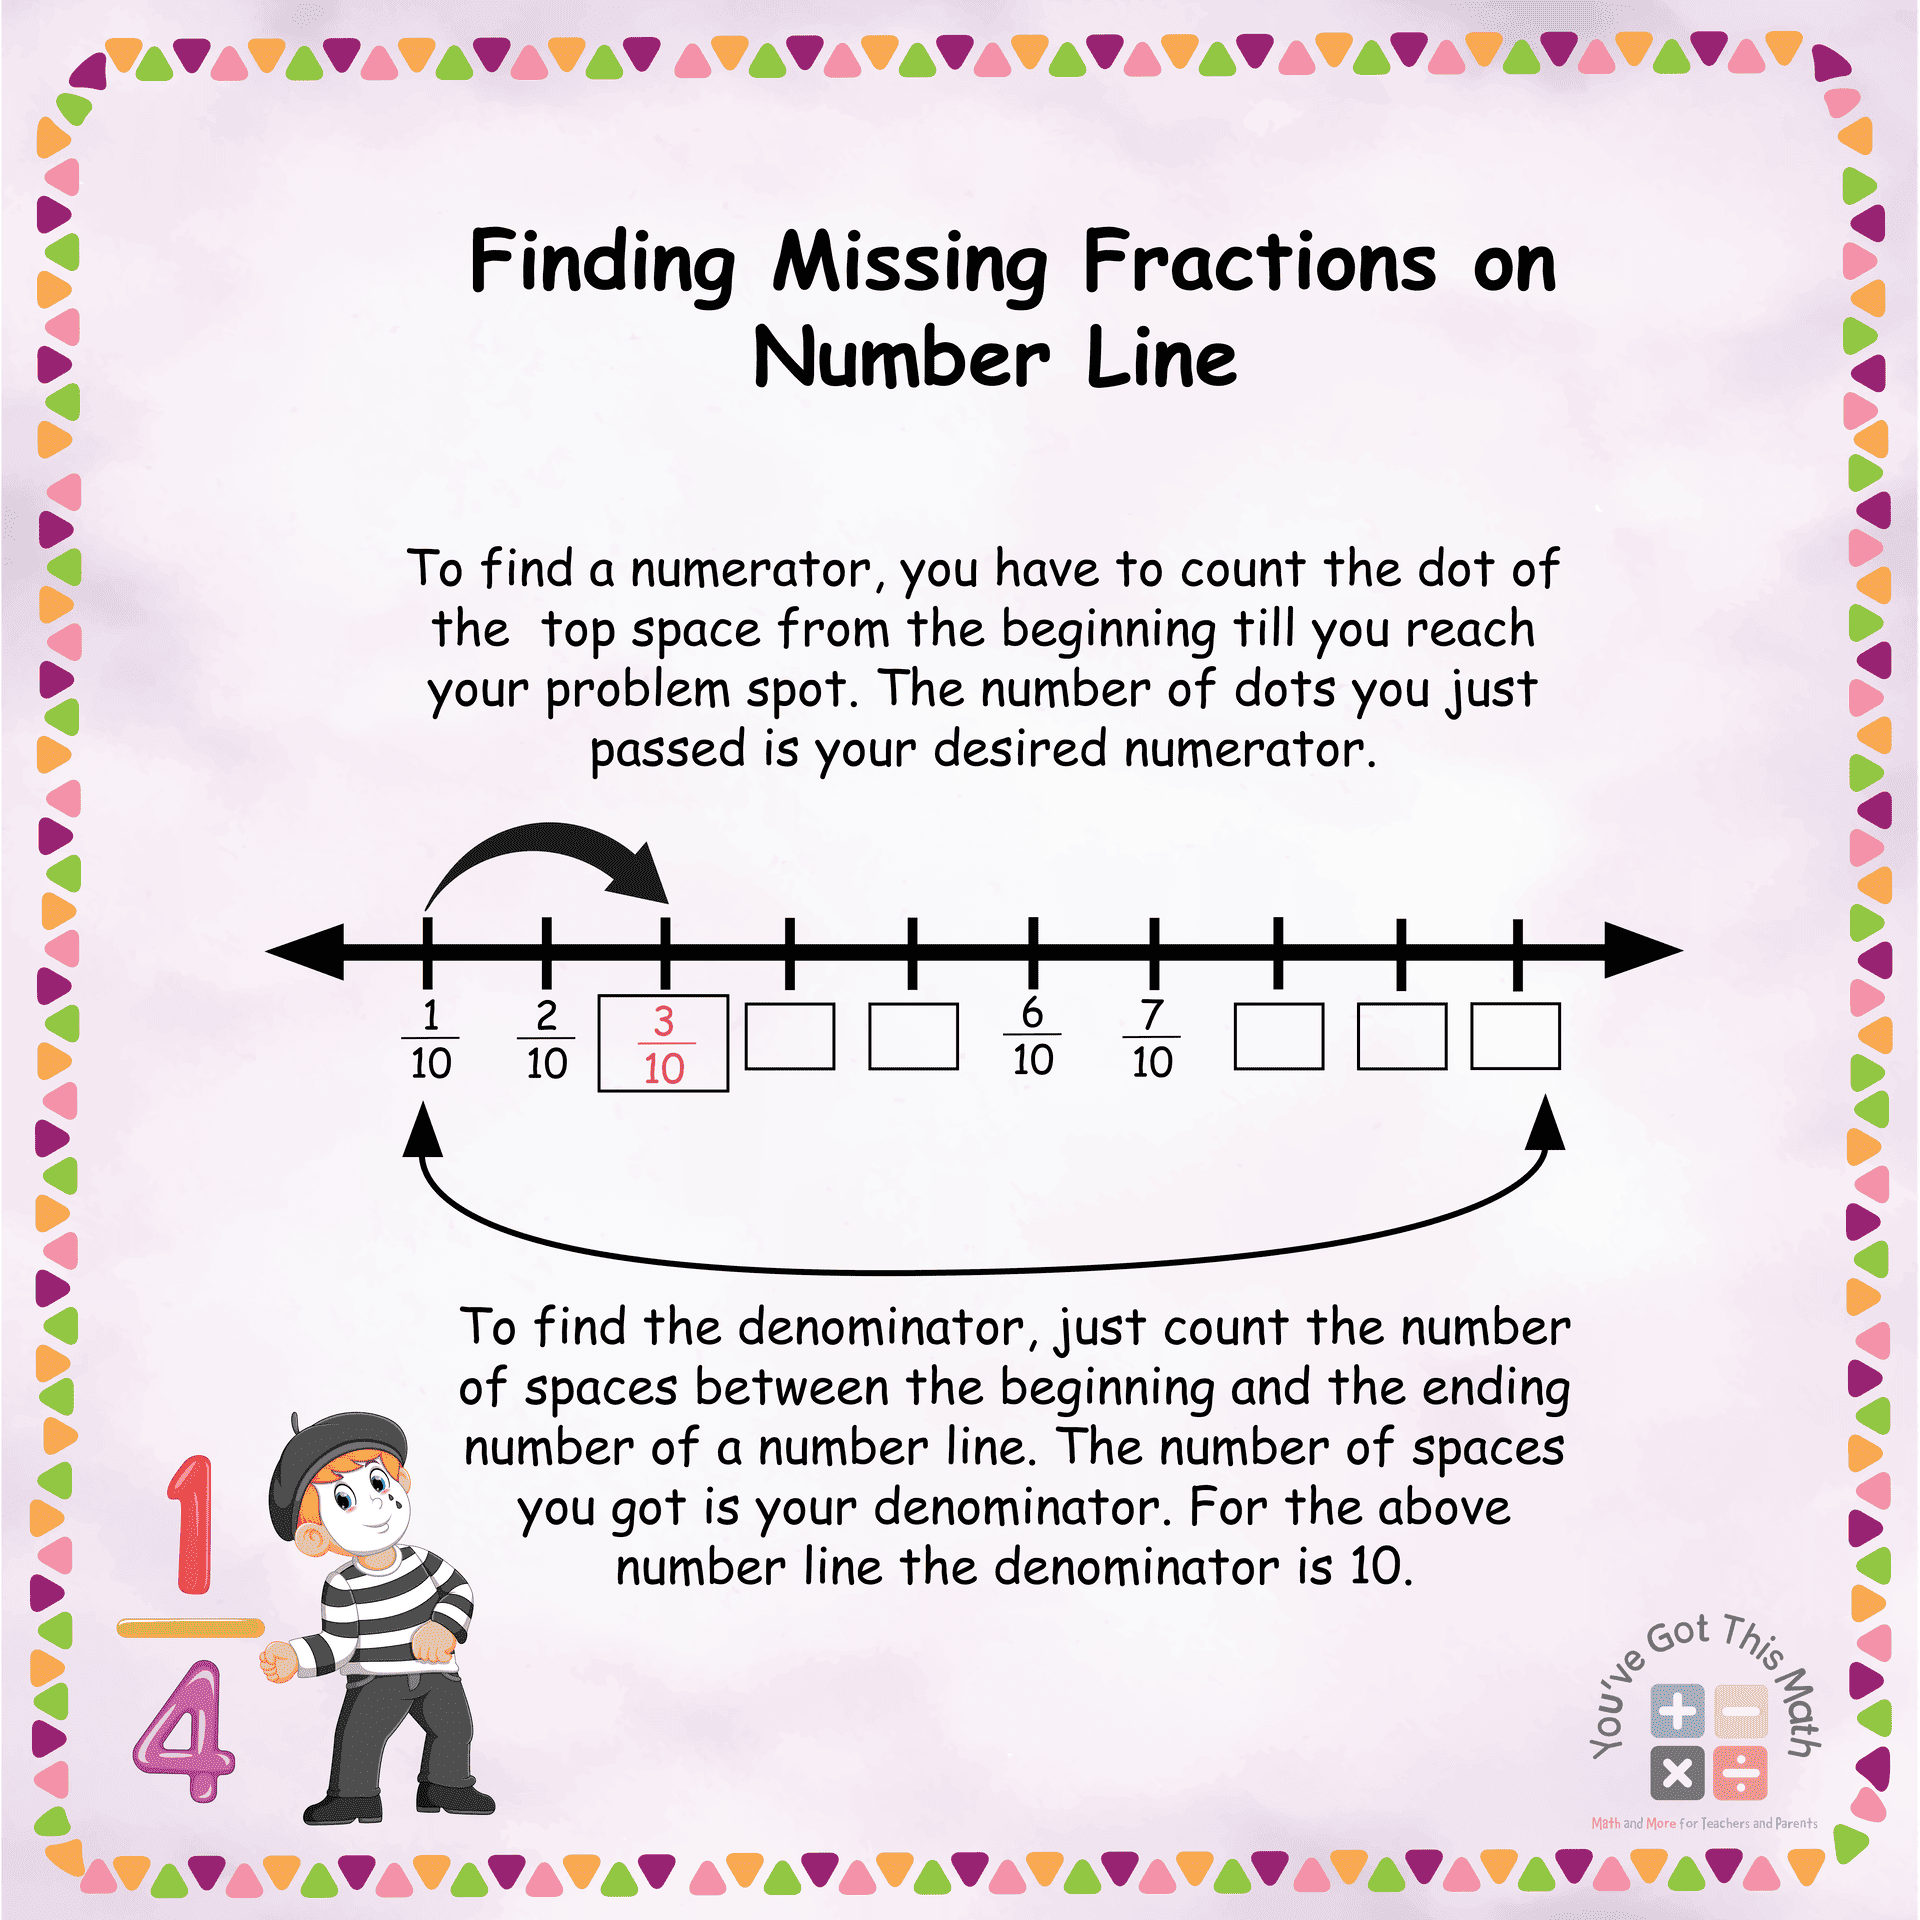 Finding Missing Fractions on Number Line